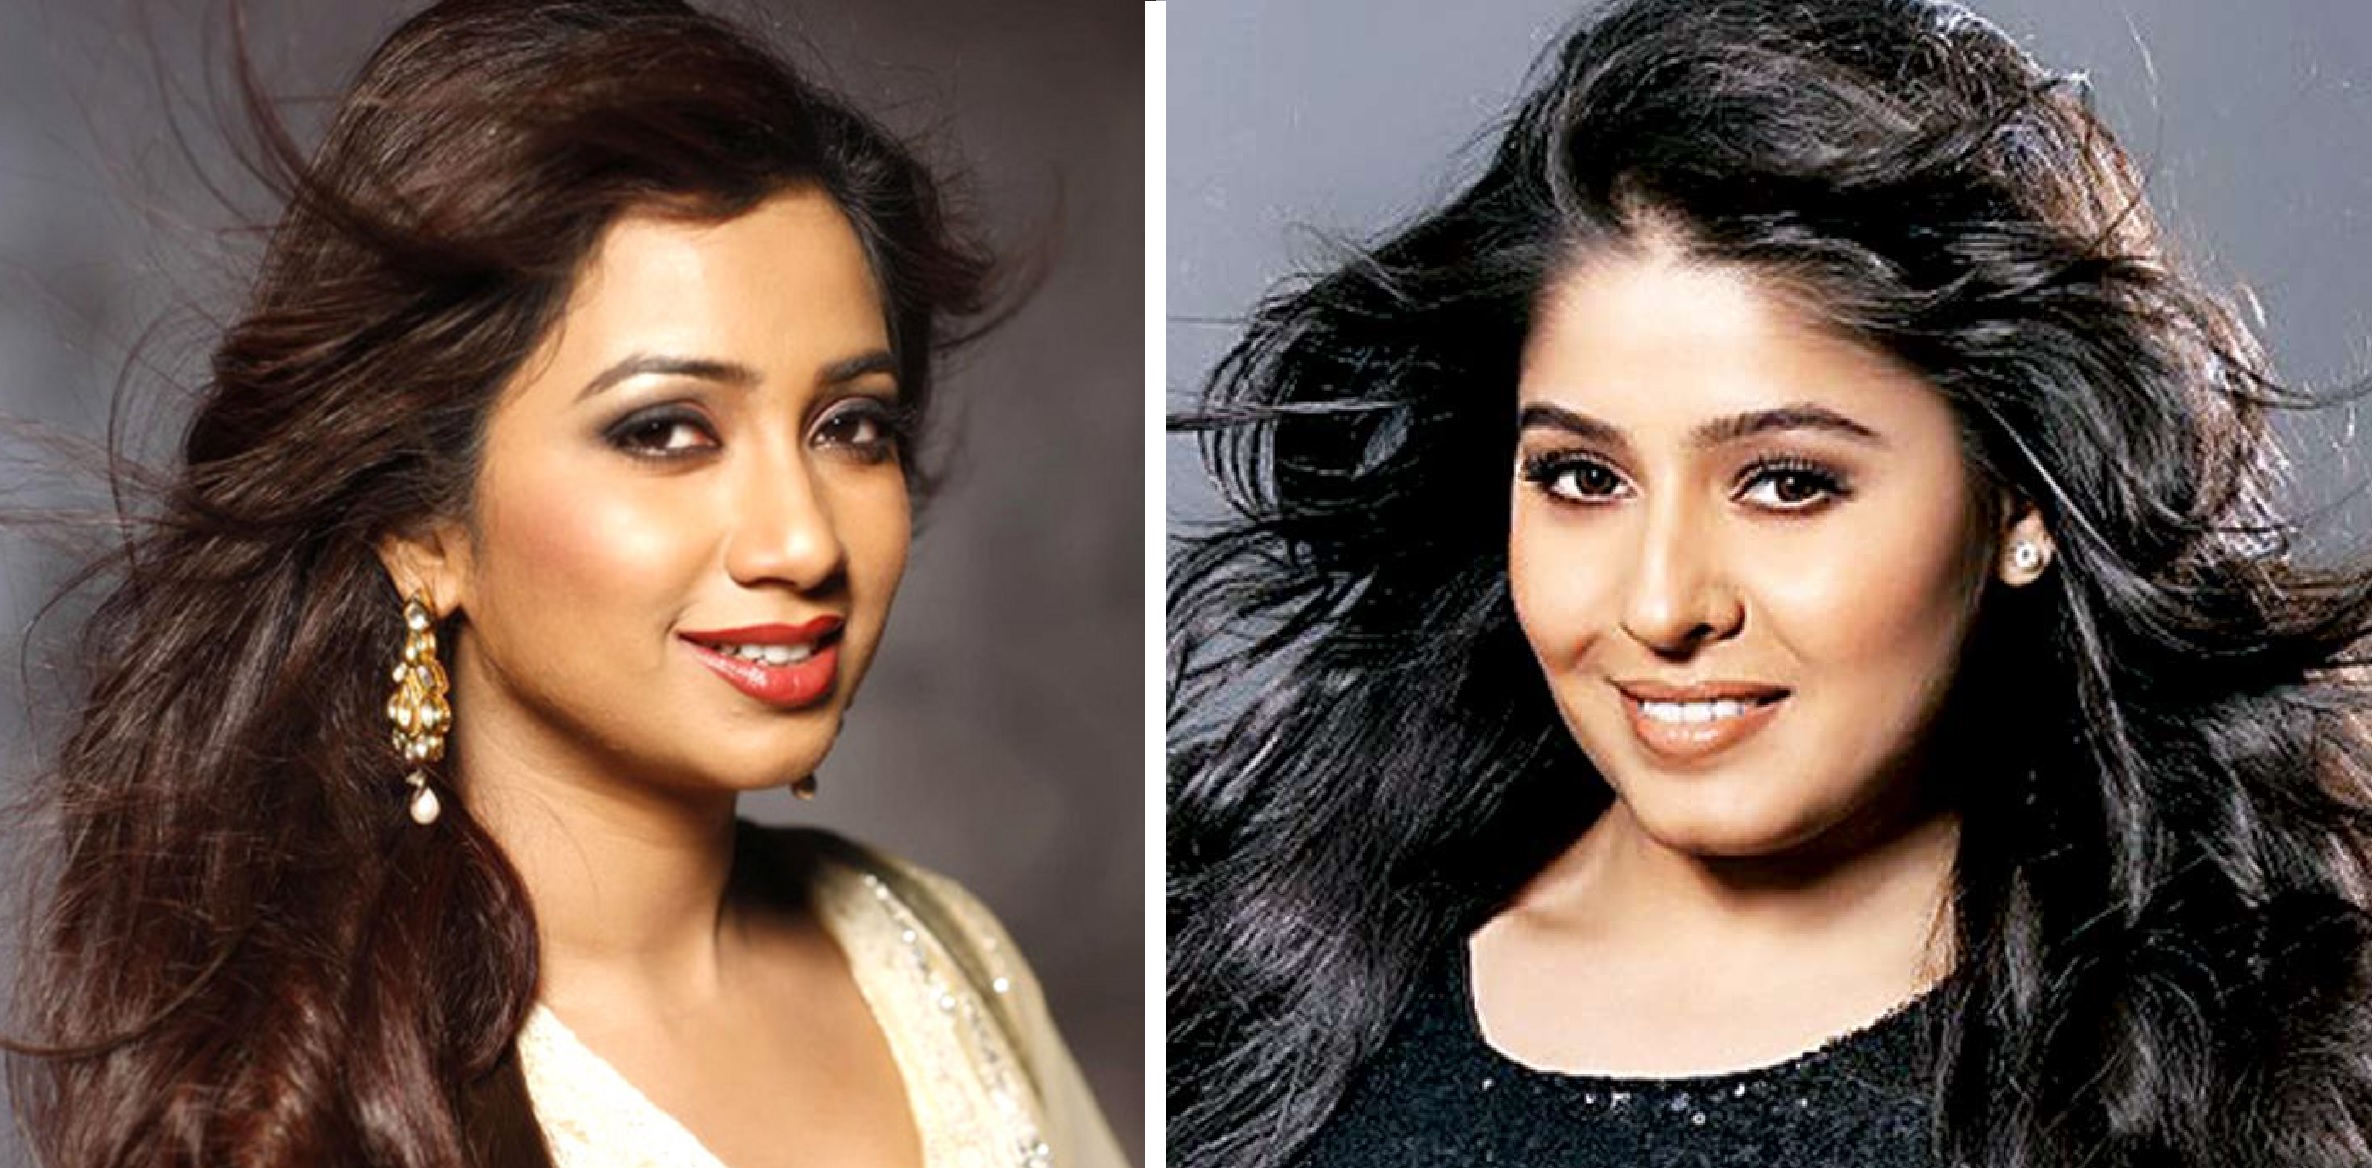 Shreya Ghoshal VS Sunidhi Chauhan – Who Is The Better Singer? Vote Here!